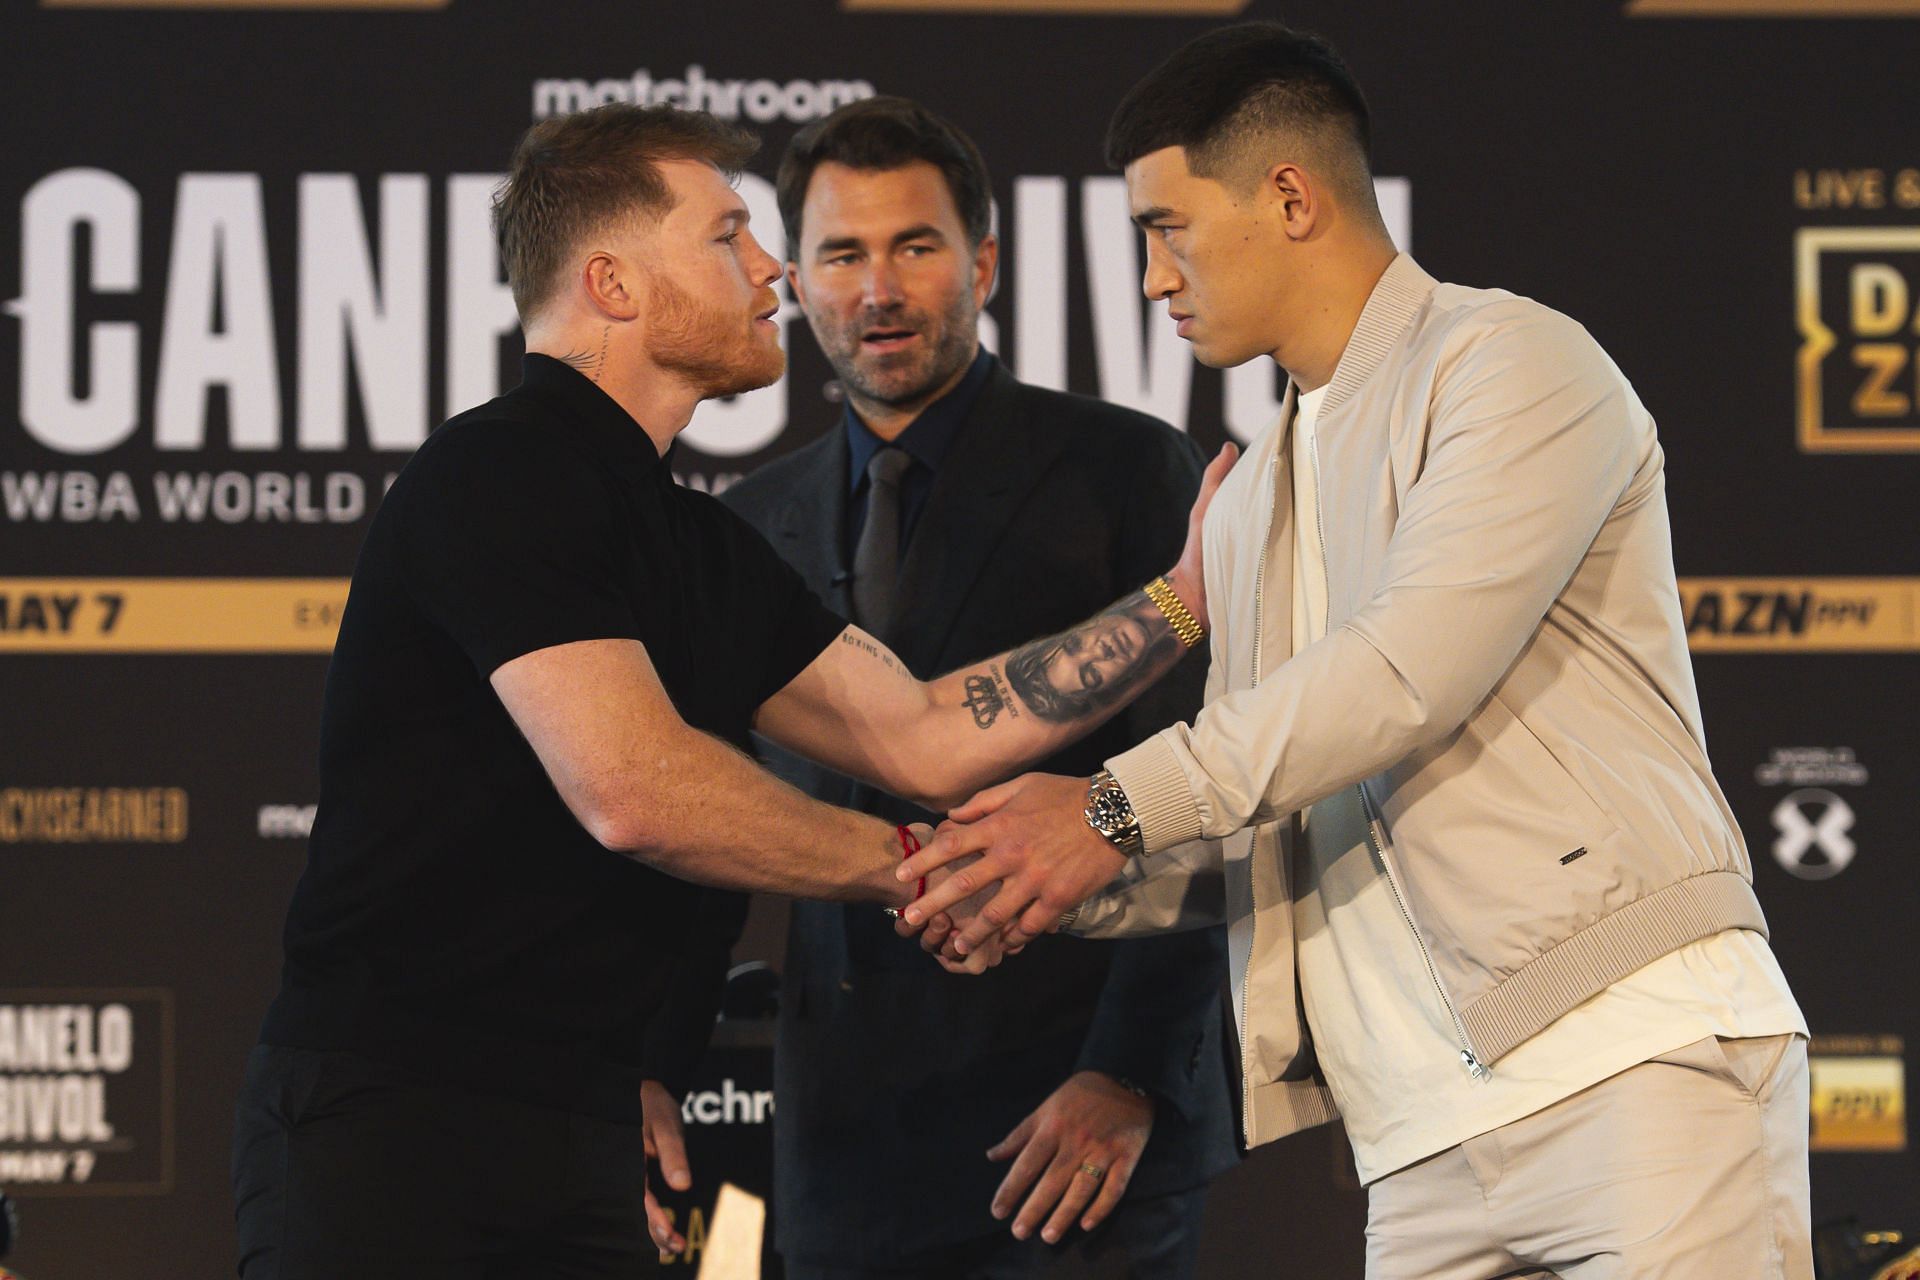 Canelo Alvarez (L) and Dmitry Bivol (R) had their first press conference today